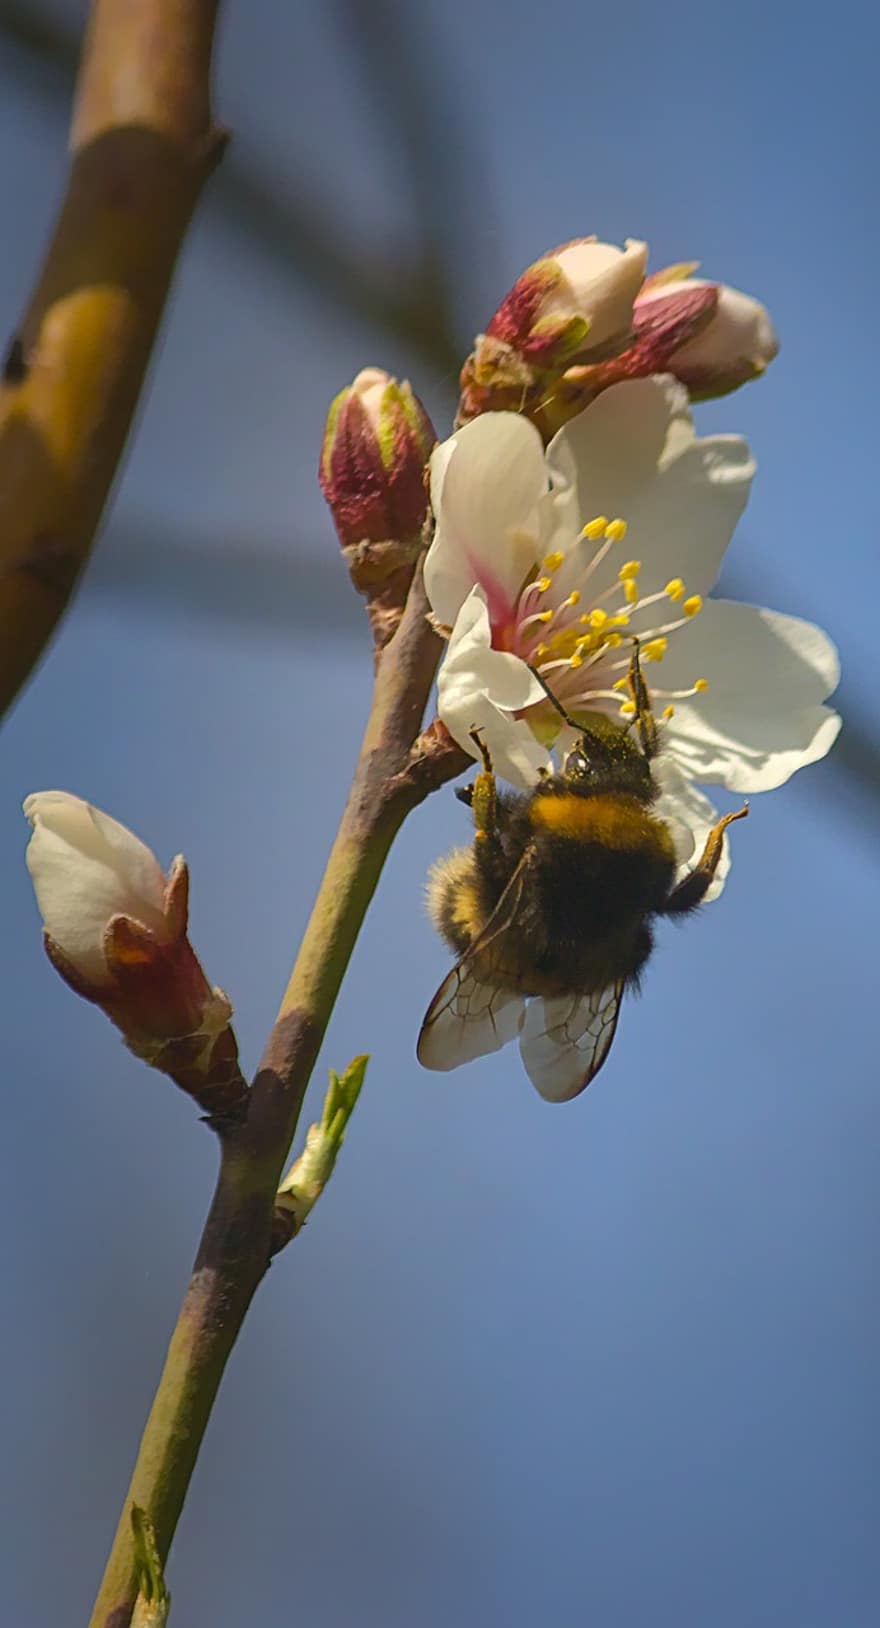 Hummel, Apricot Blossom, Pollinate, Pollination, Insect, Hymenoptera, Blossom, Bloom, Nature, Flower, Spring